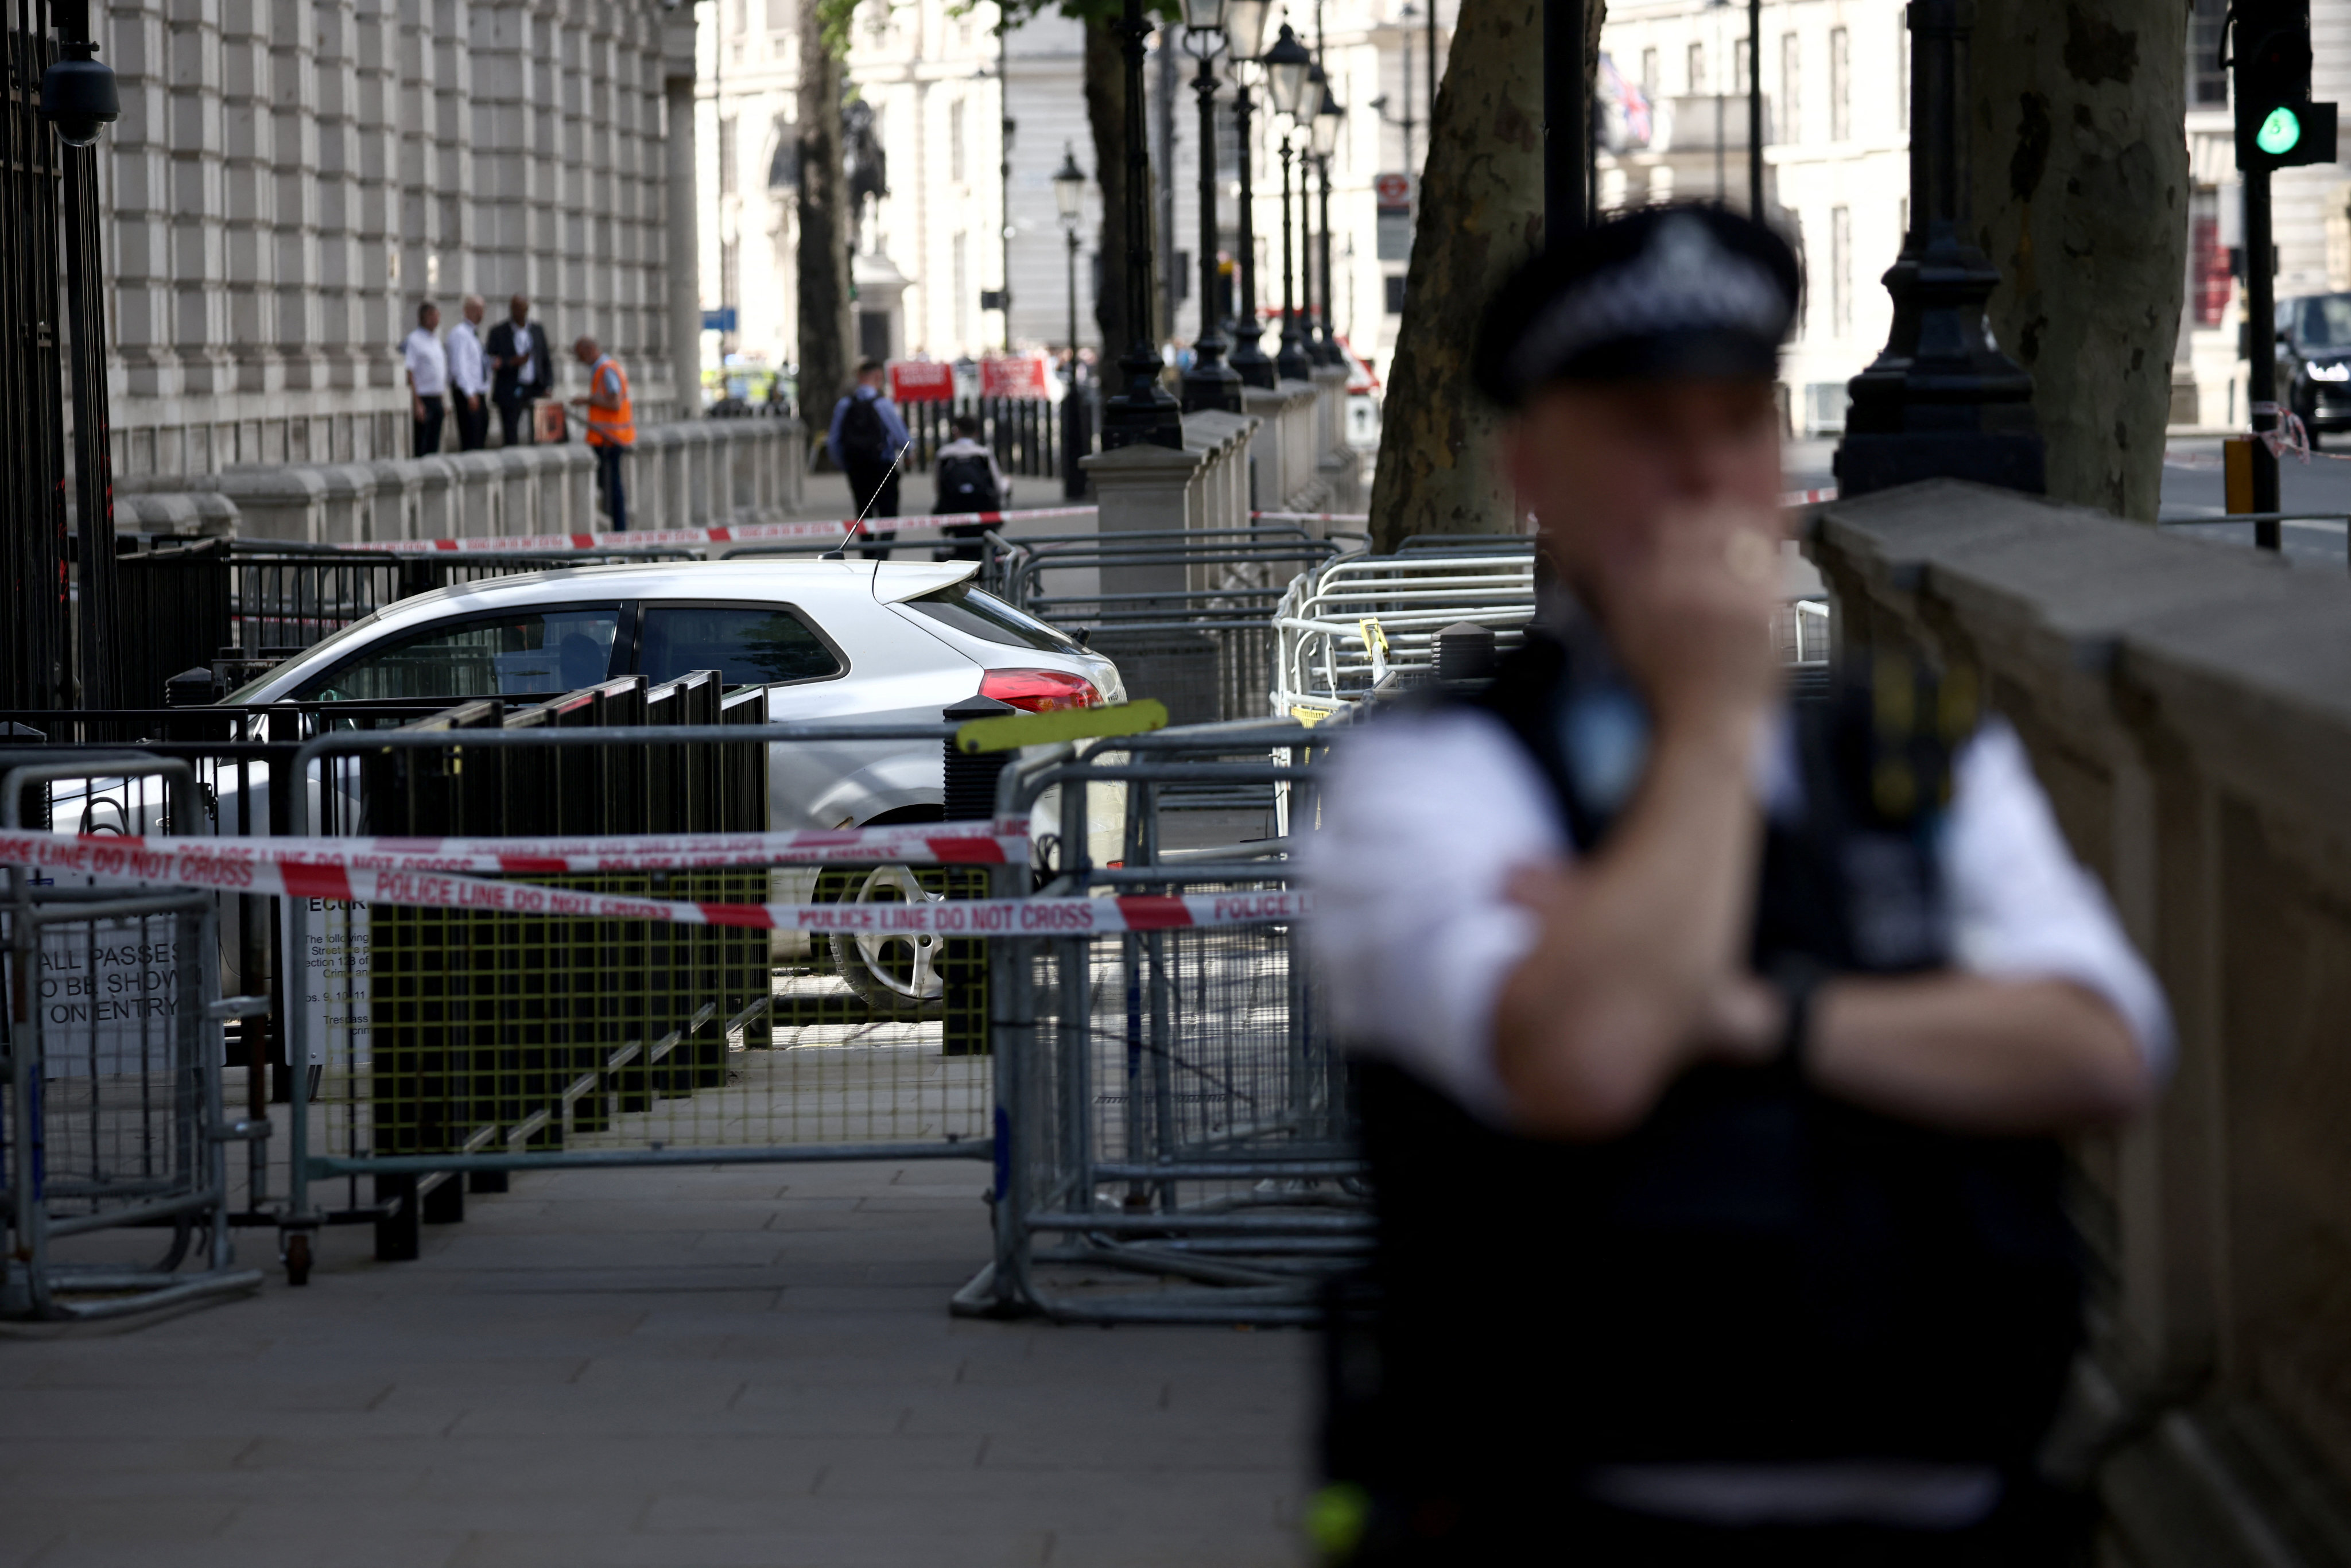 A police officer stands guard near the site where a car crashed into the front gates of Downing Street in London on Thursday. Photo: Reuters